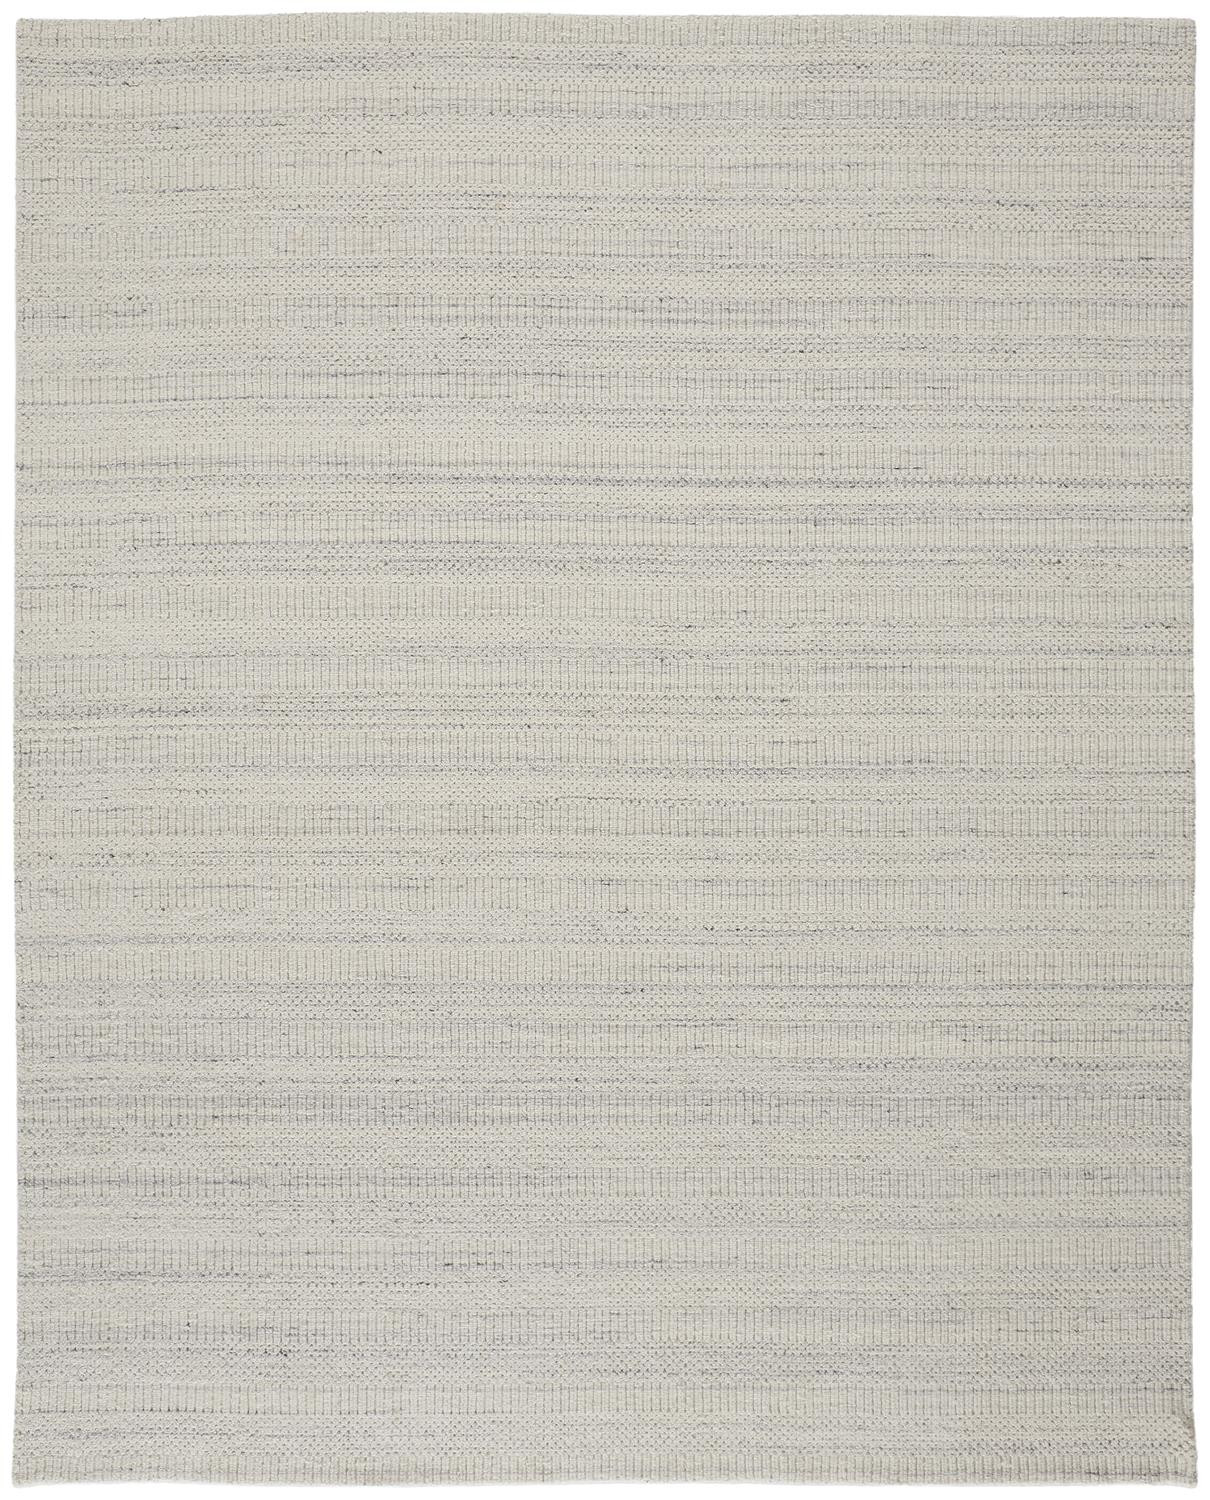 5' X 8' Ivory And Gray Wool Hand Woven Stain Resistant Area Rug-514057-1